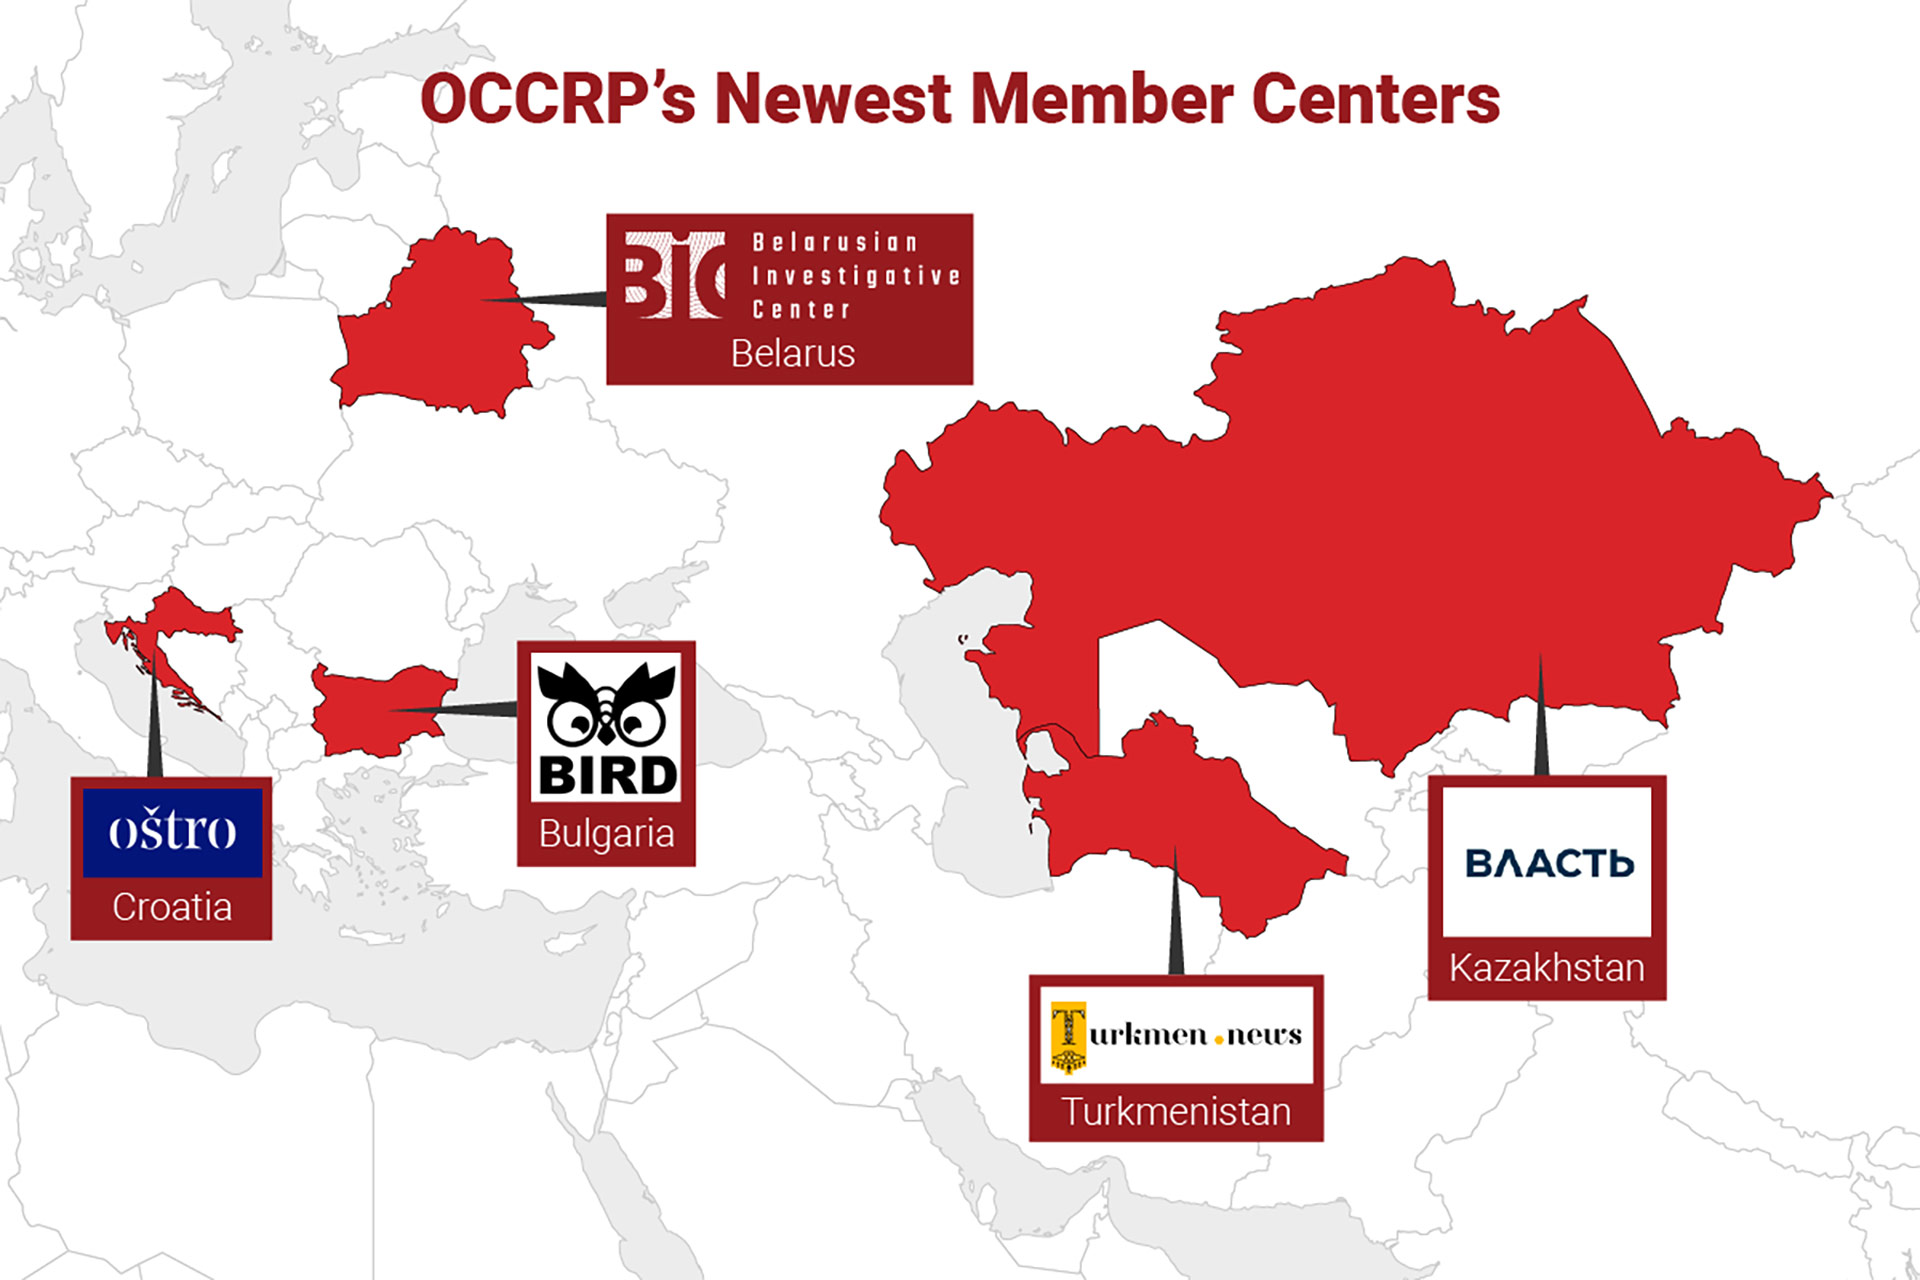 OCCRP Welcomes Five New Member Centers in Central Asia, Europe